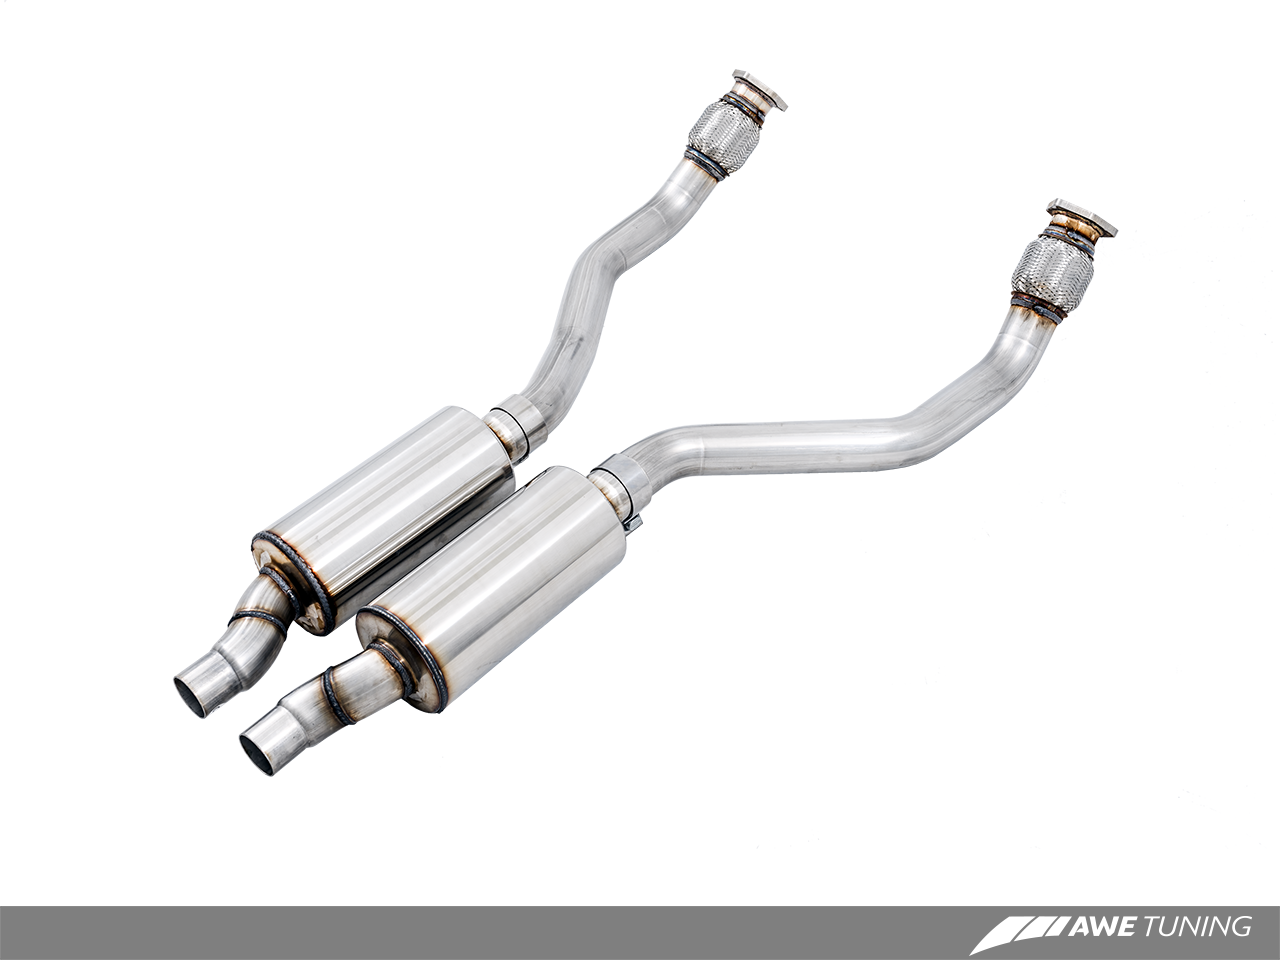 AWE Exhaust Suite and Downpipe Systems for Audi B8.5 S4